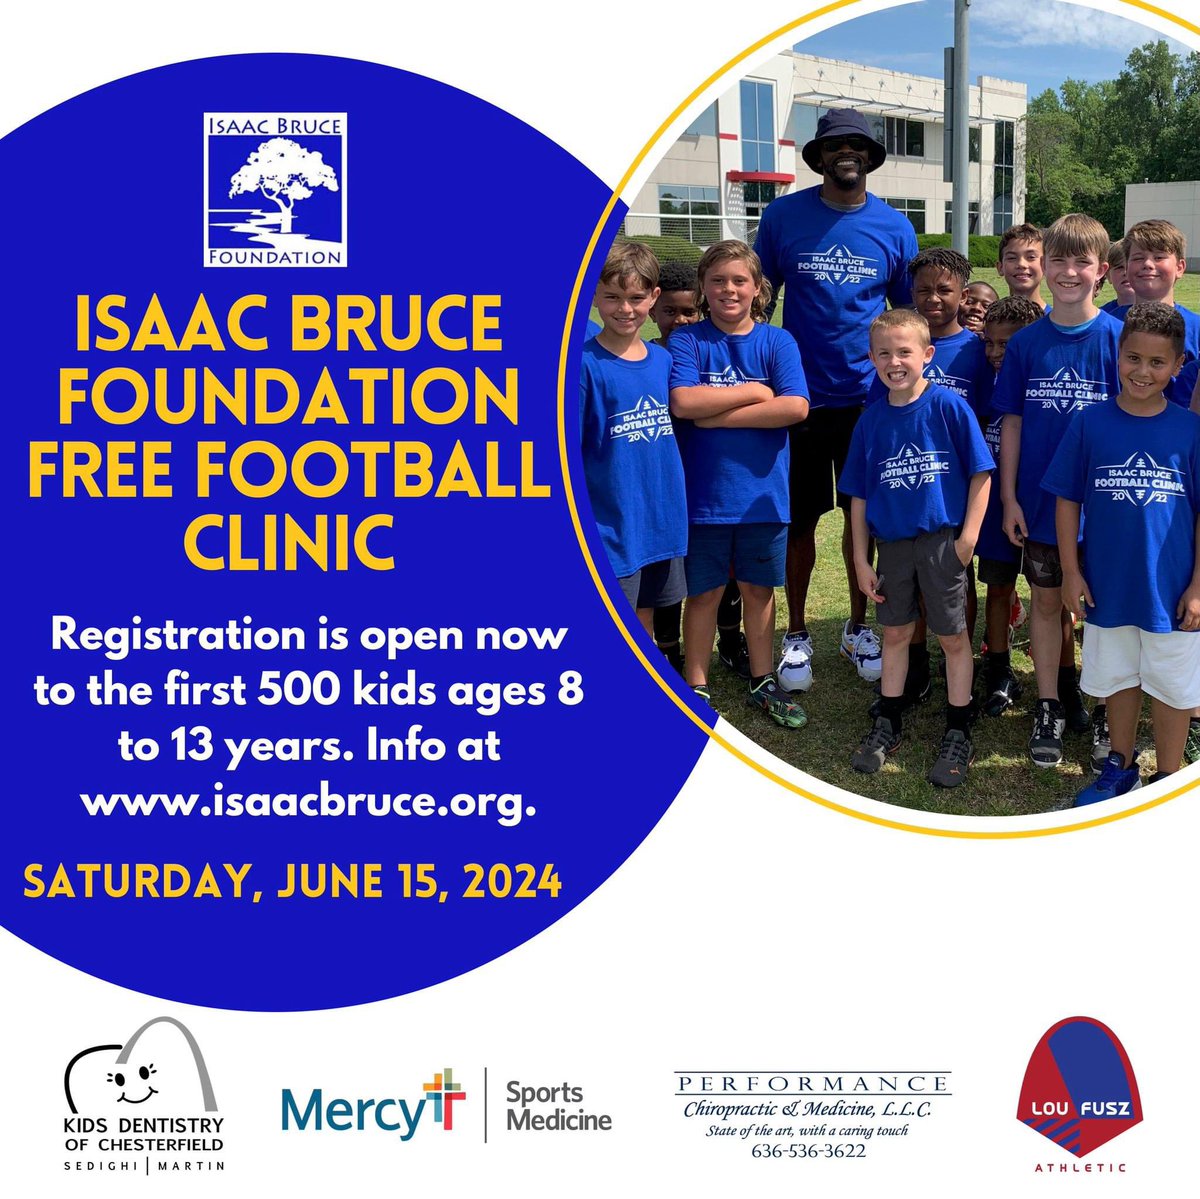 Registration is now open for the Isaac Bruce Foundation's FREE Football Clinic on Saturday, June 15! Register and get more information here: zeffy.com/en-US/ticketin…